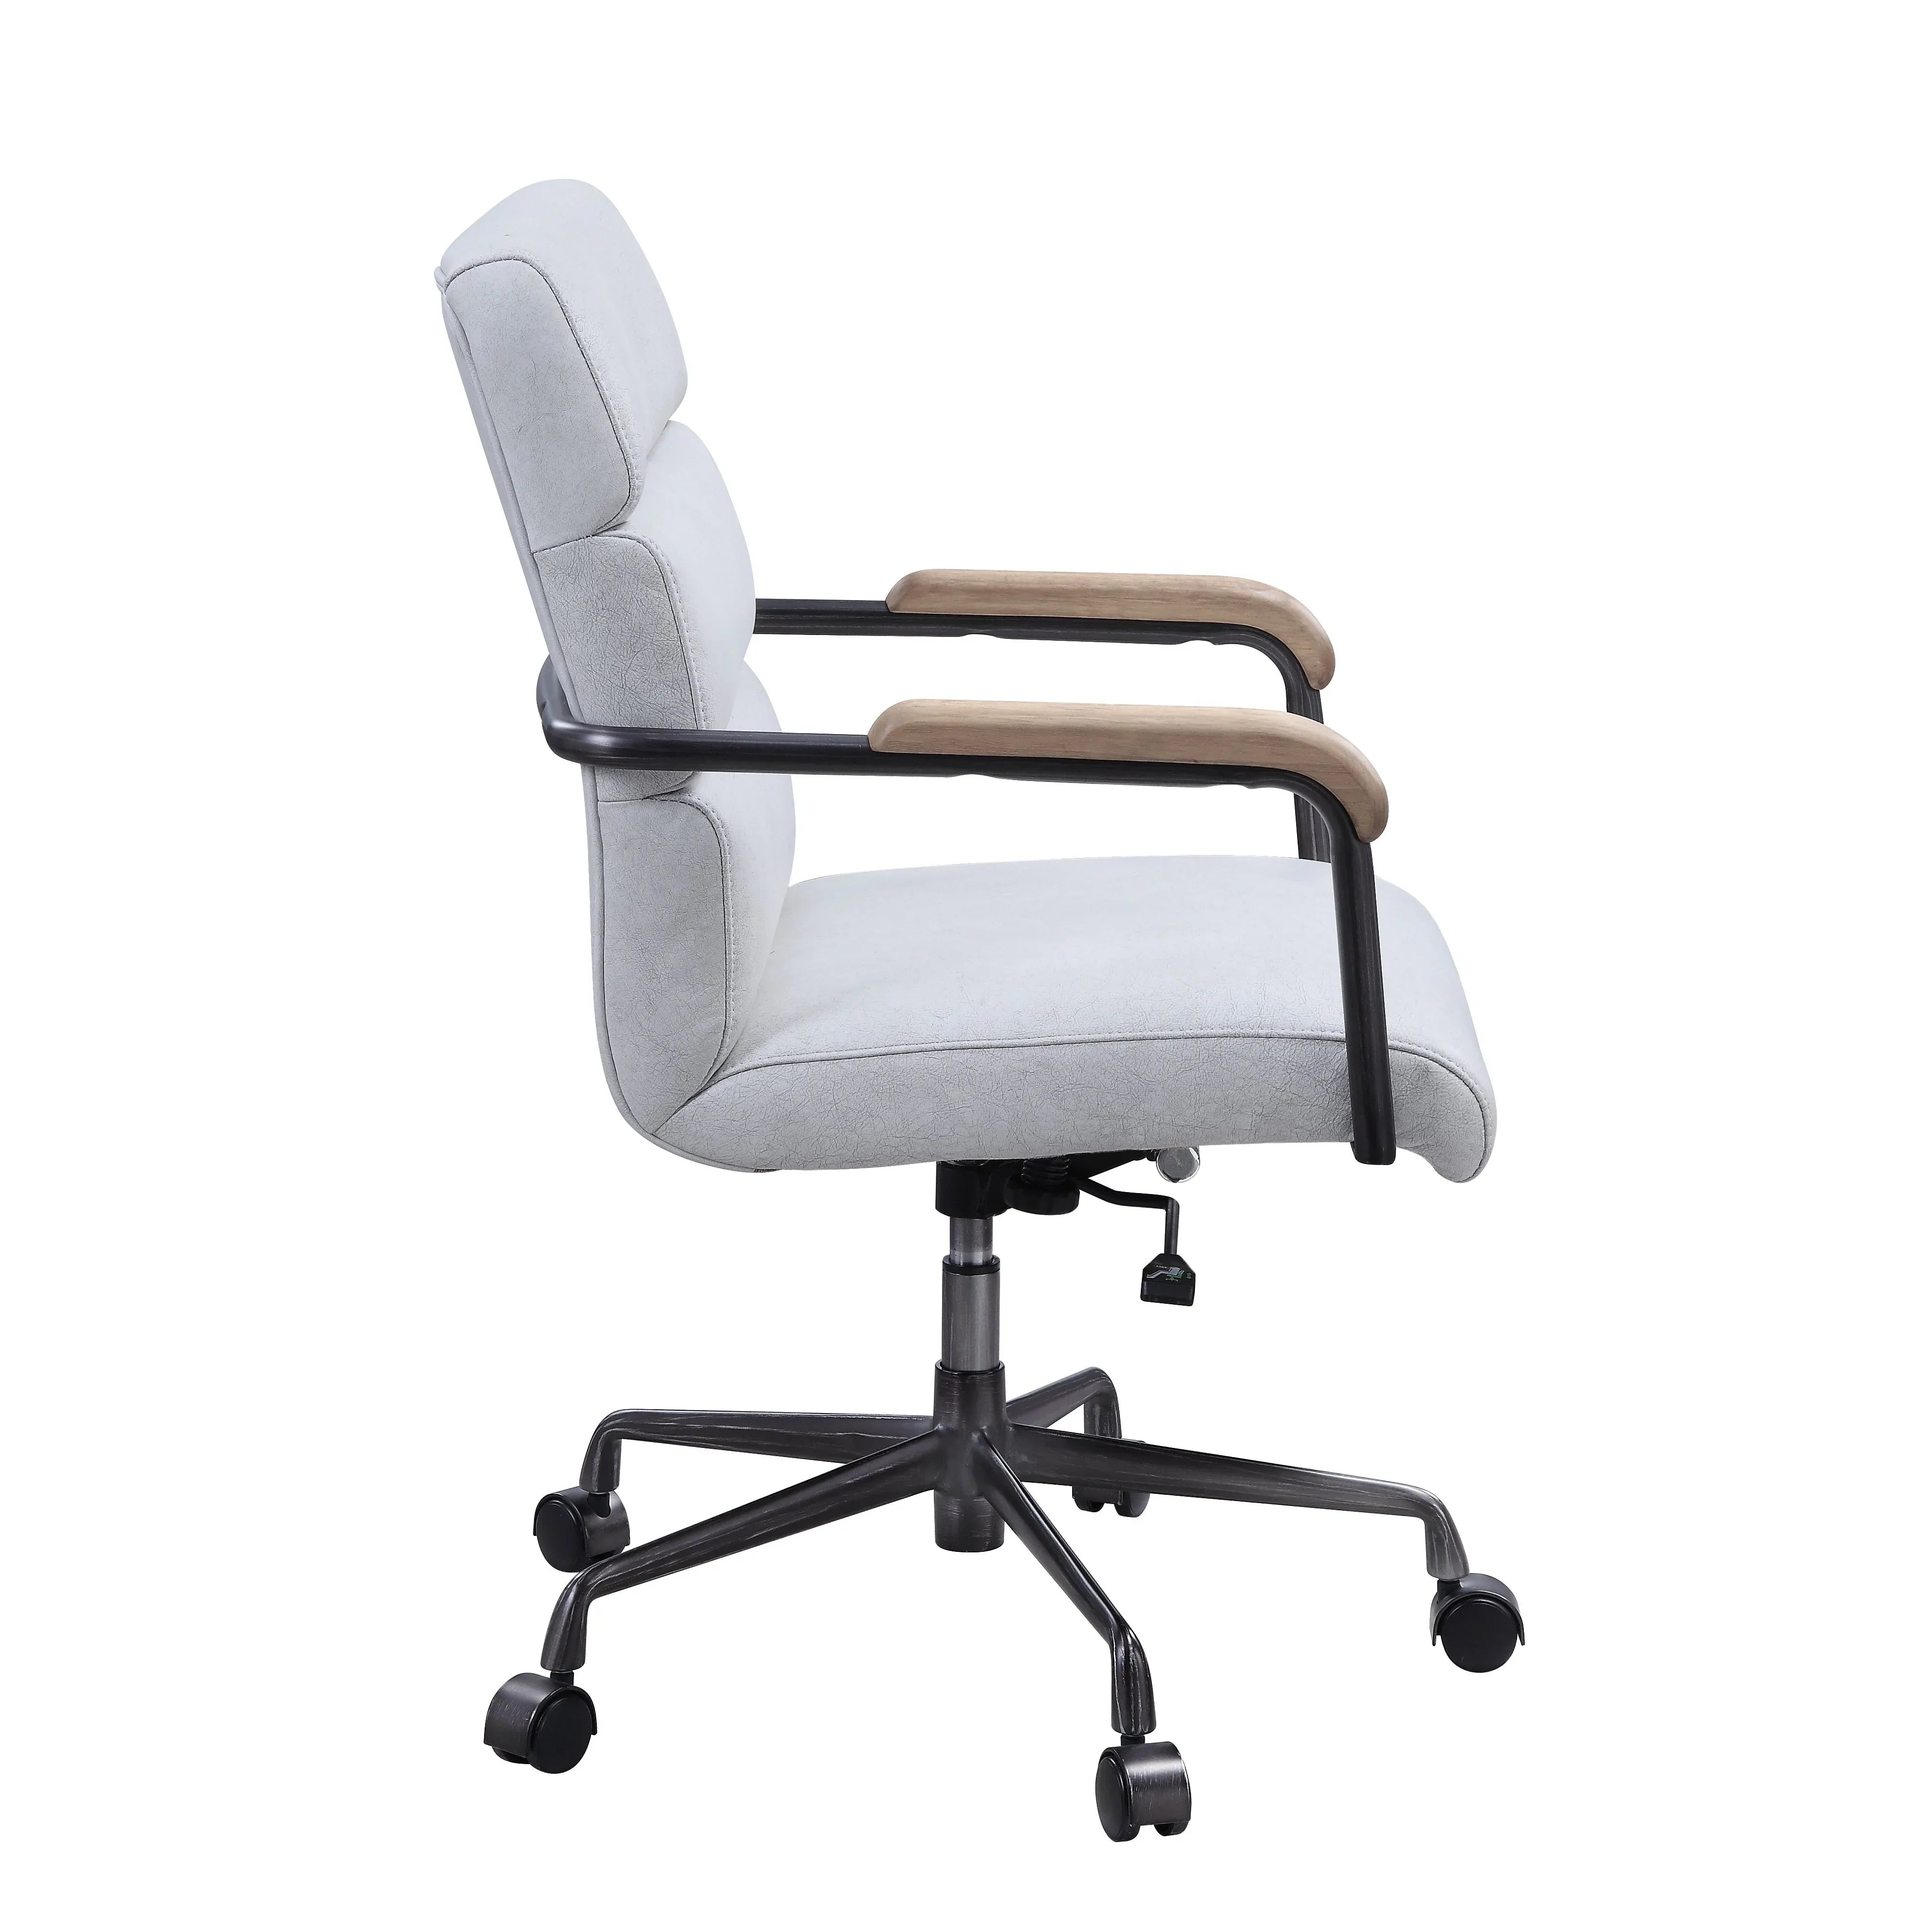 Halcyon Vintage White Finish Office Chair Model 93243 By ACME Furniture